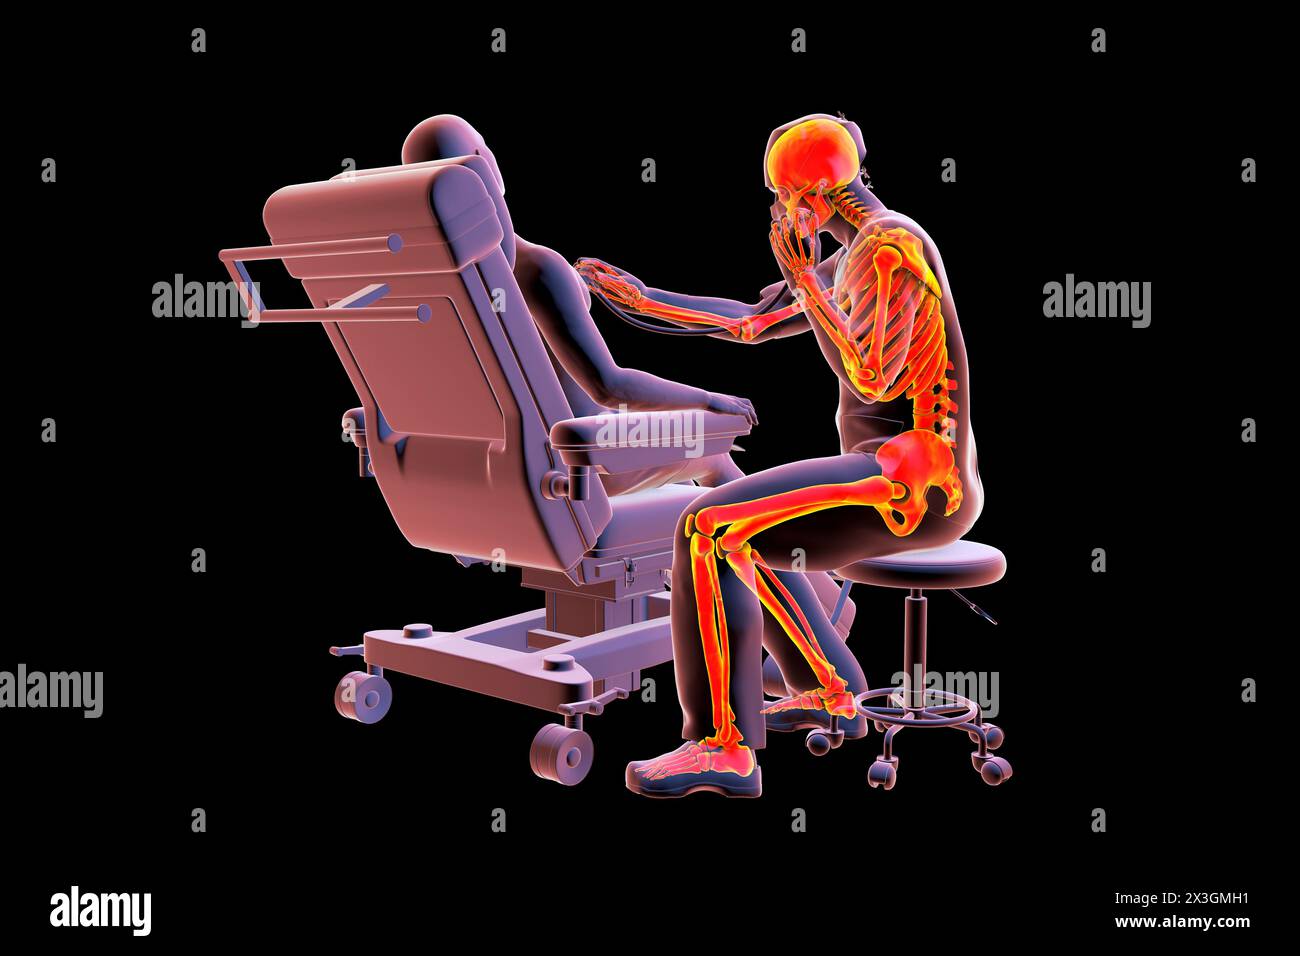 Illustration depicting a healthcare worker with a highlighted skeleton, symbolising skeletal disorders associated with the healthcare profession. Stock Photo